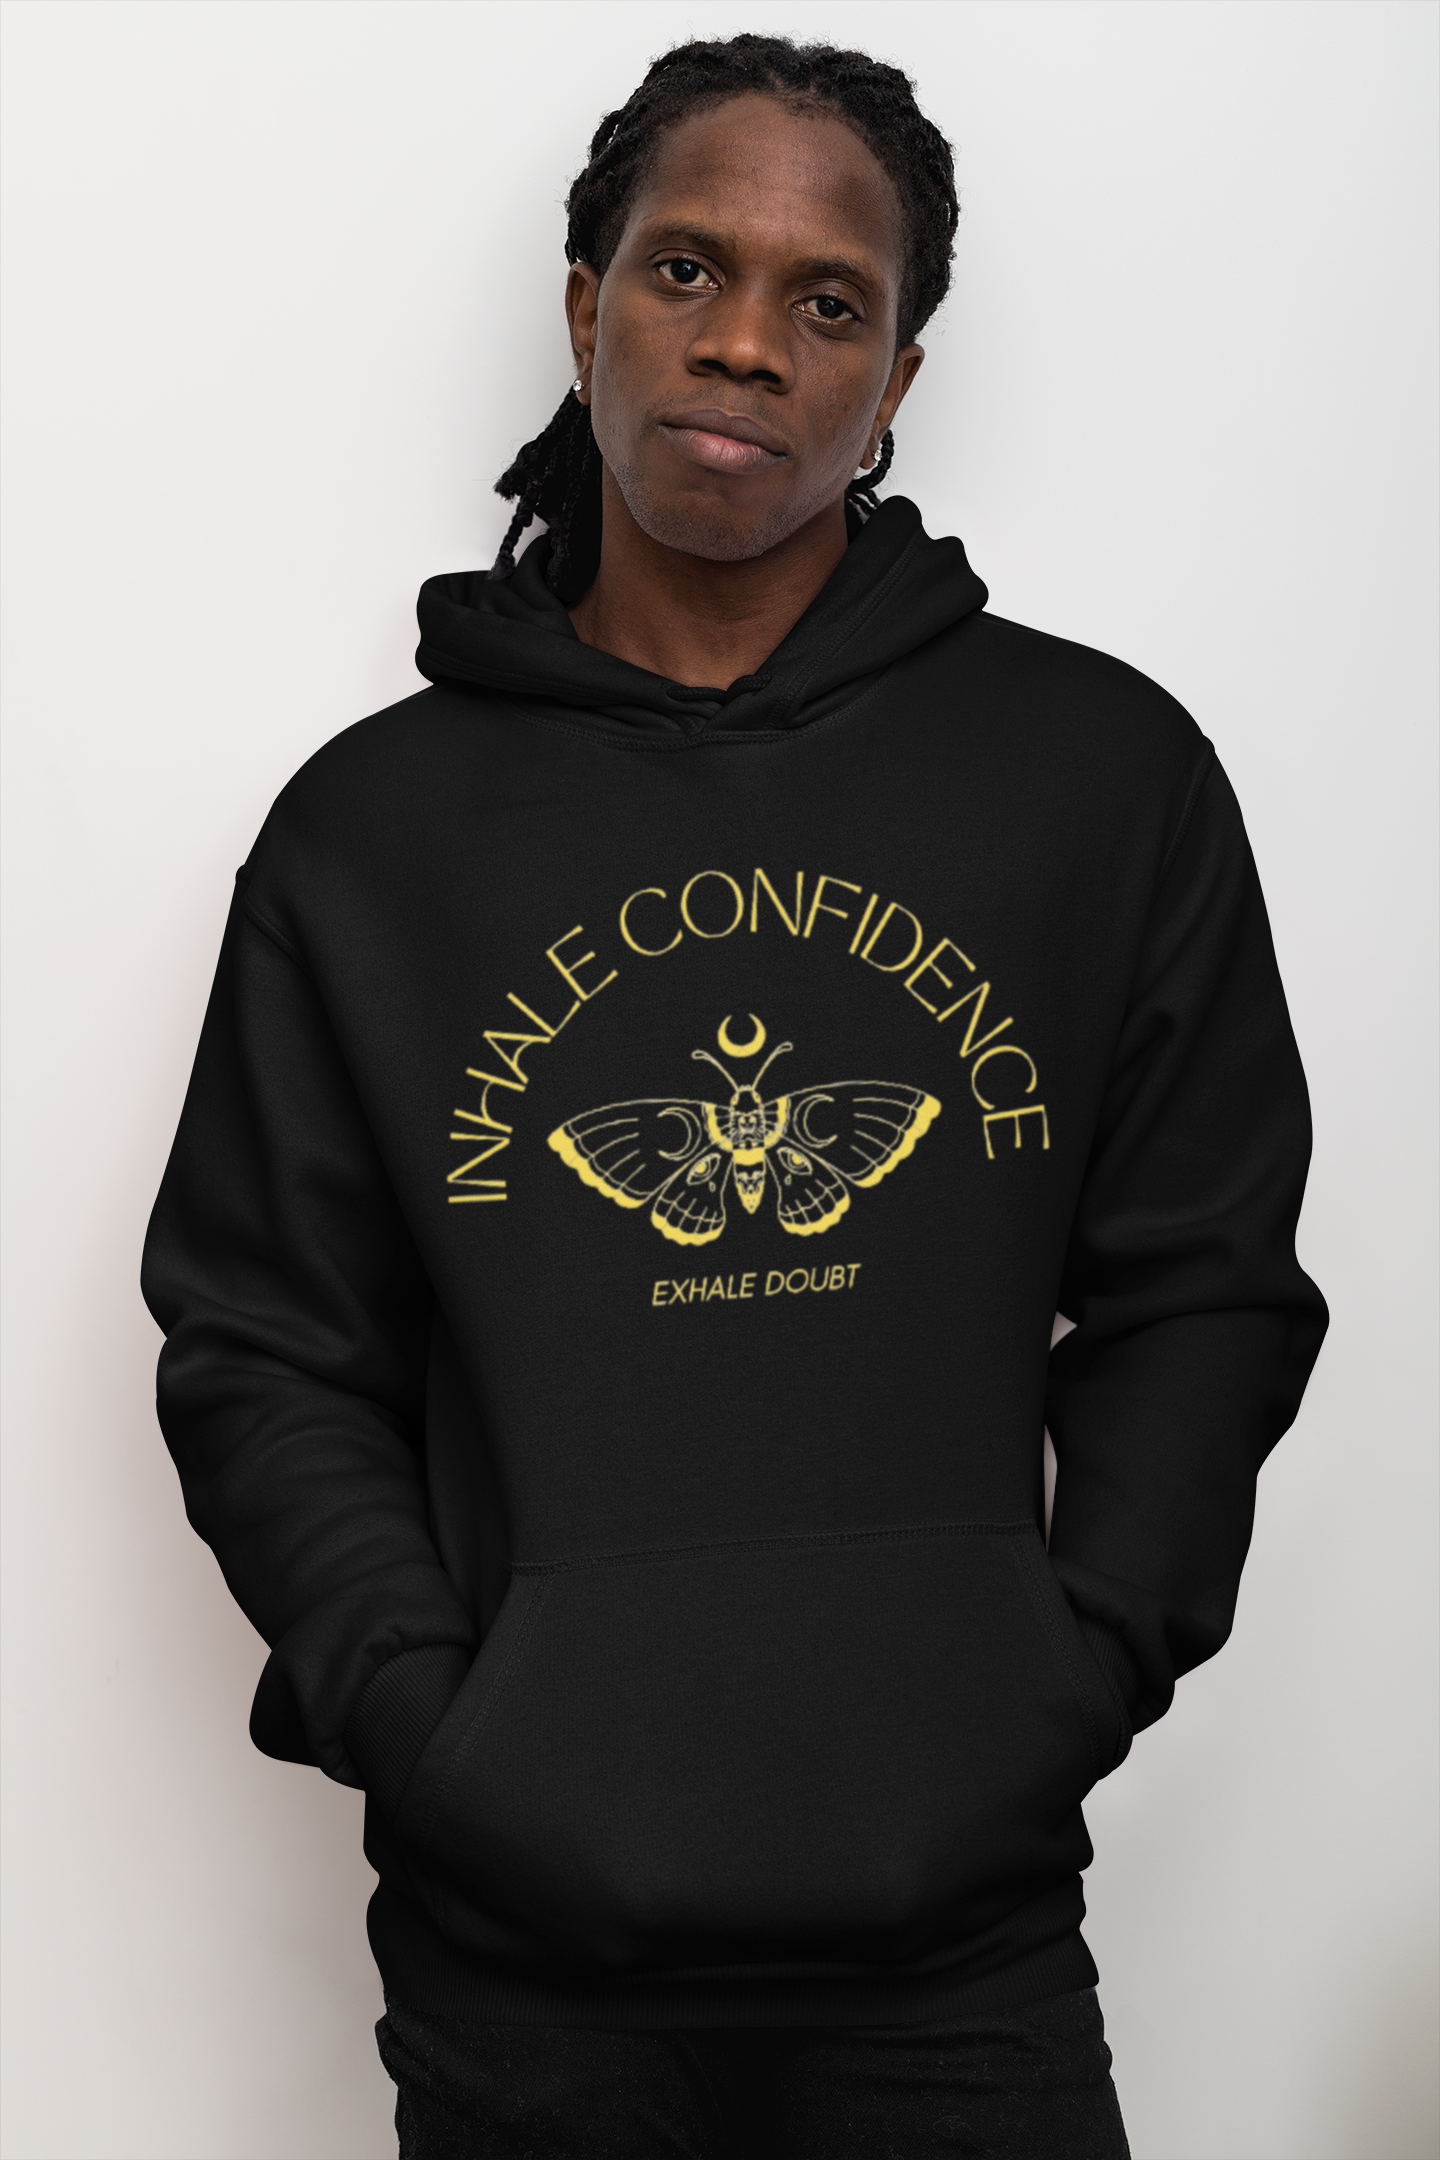 INHALE CONFIDENCE EXHALE DOUBT PULLOVER HOODIE